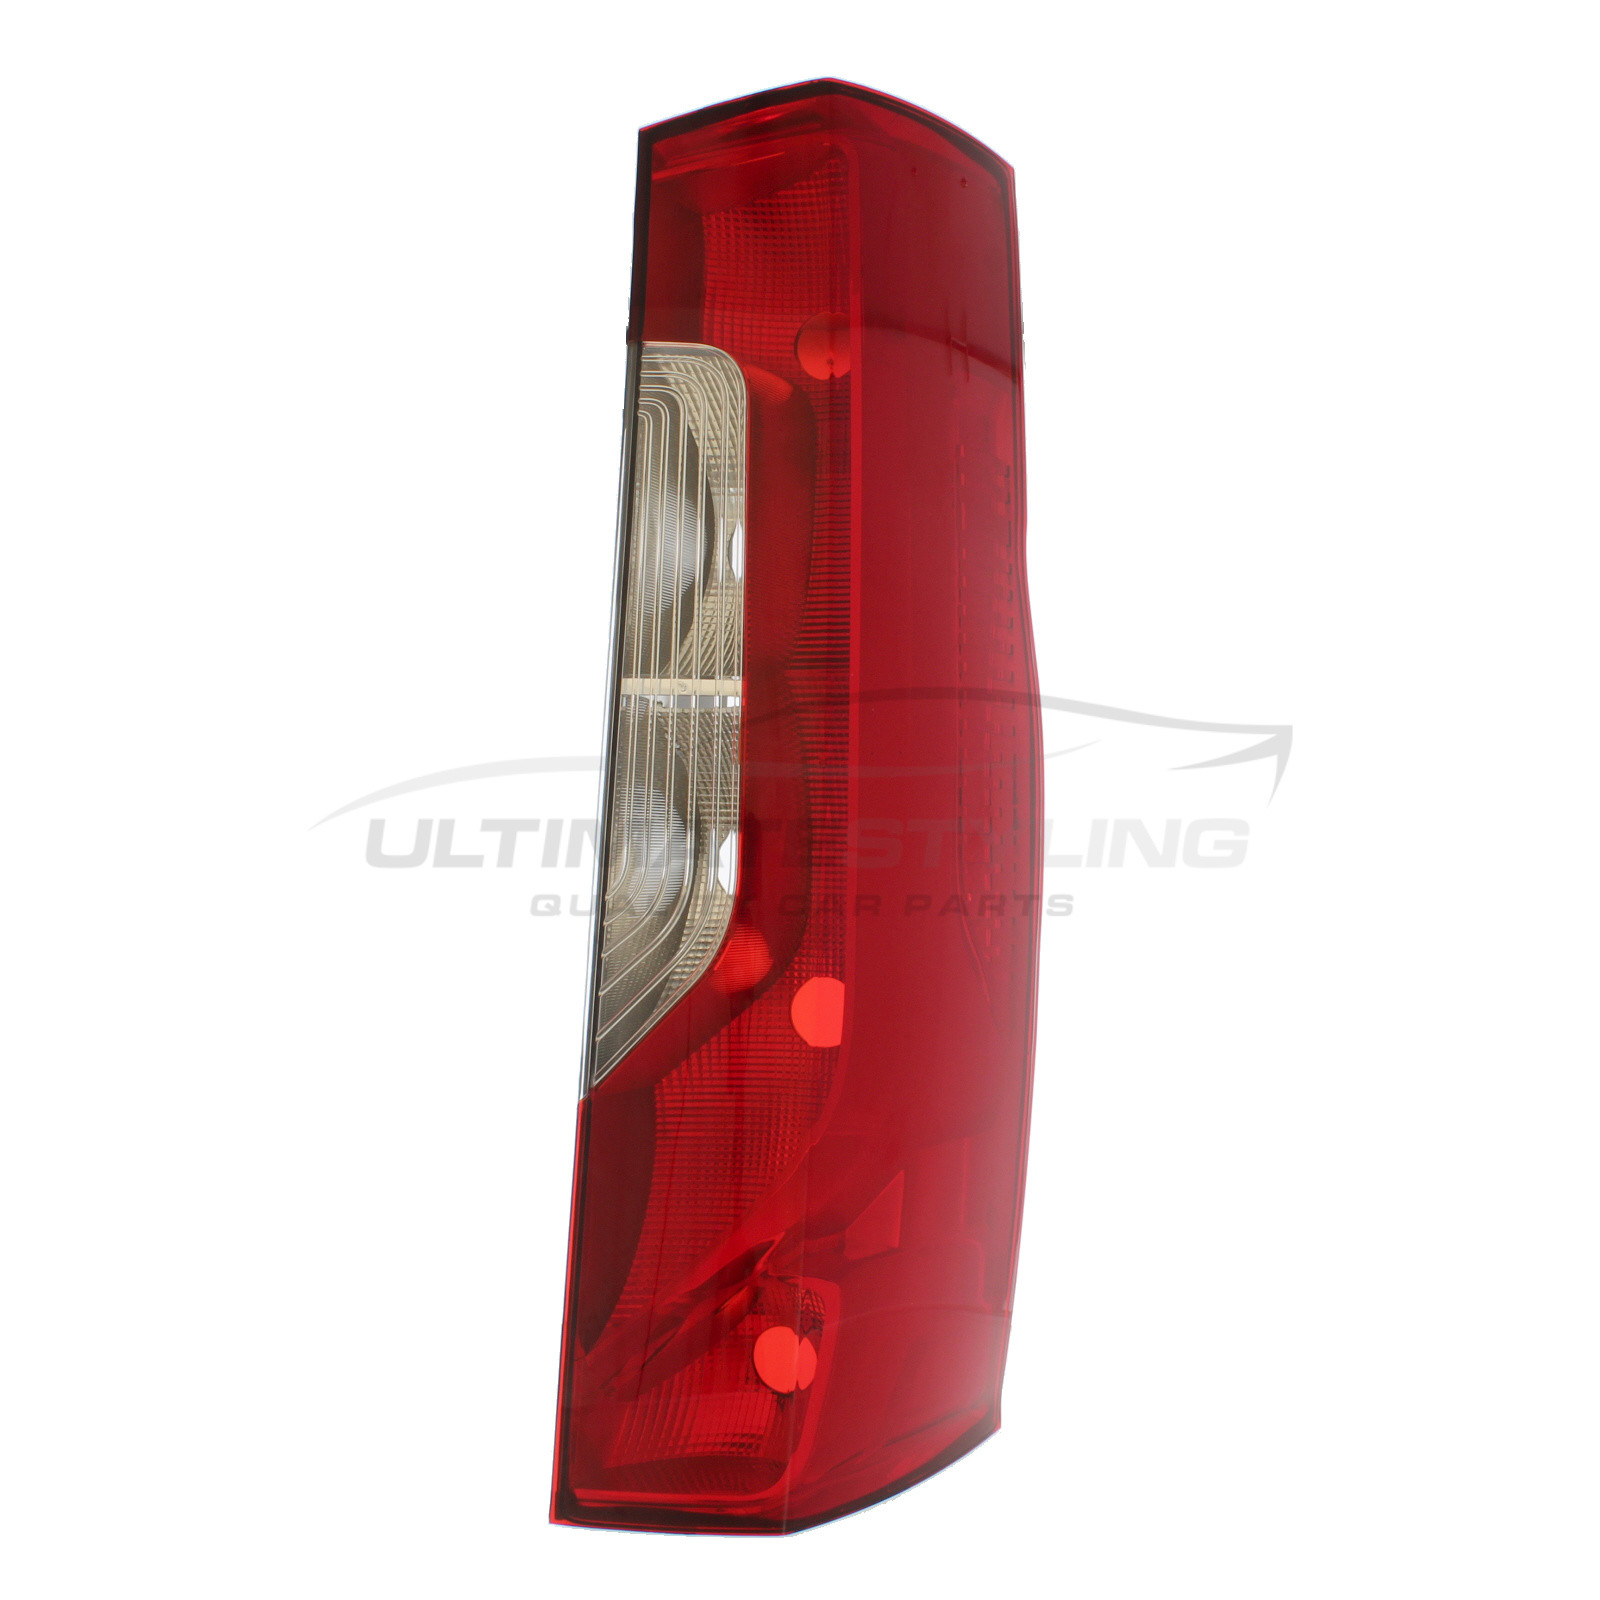 KarParts360 Tail Light Assembly For Toyota Sequoia 2008-2017